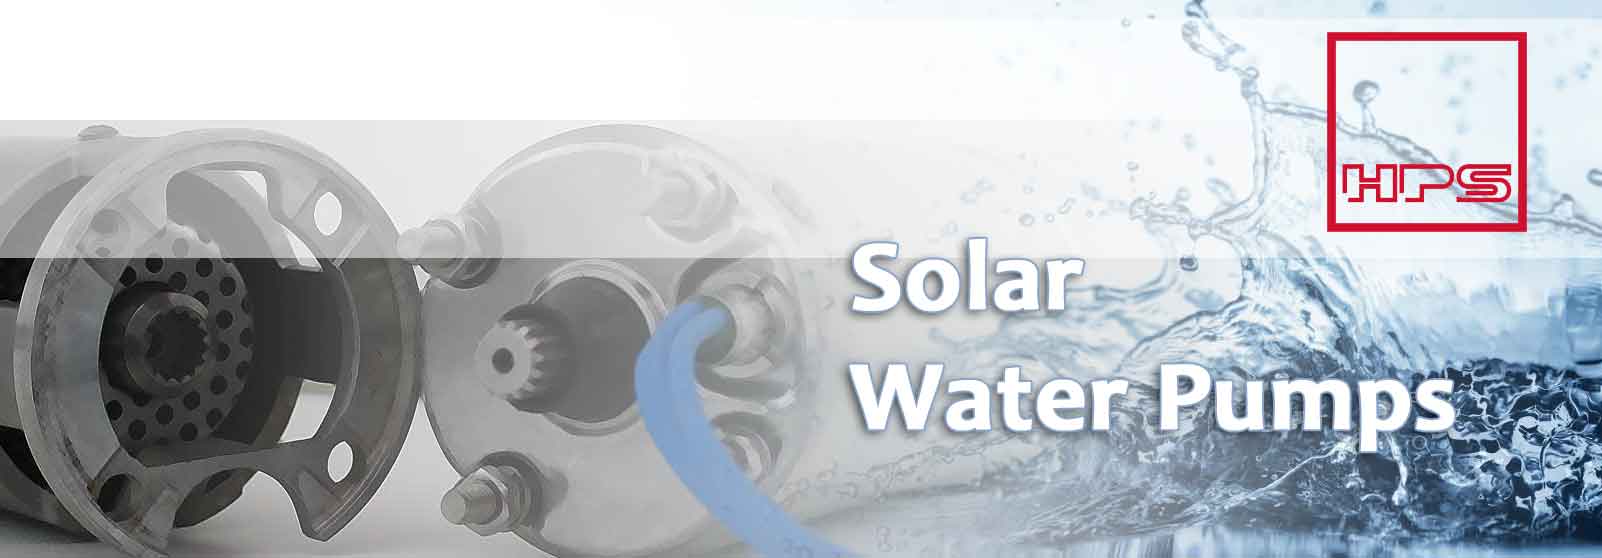 PUMPING WATER SYSTEMS POWERED FROM PHOTOVOLTAIC